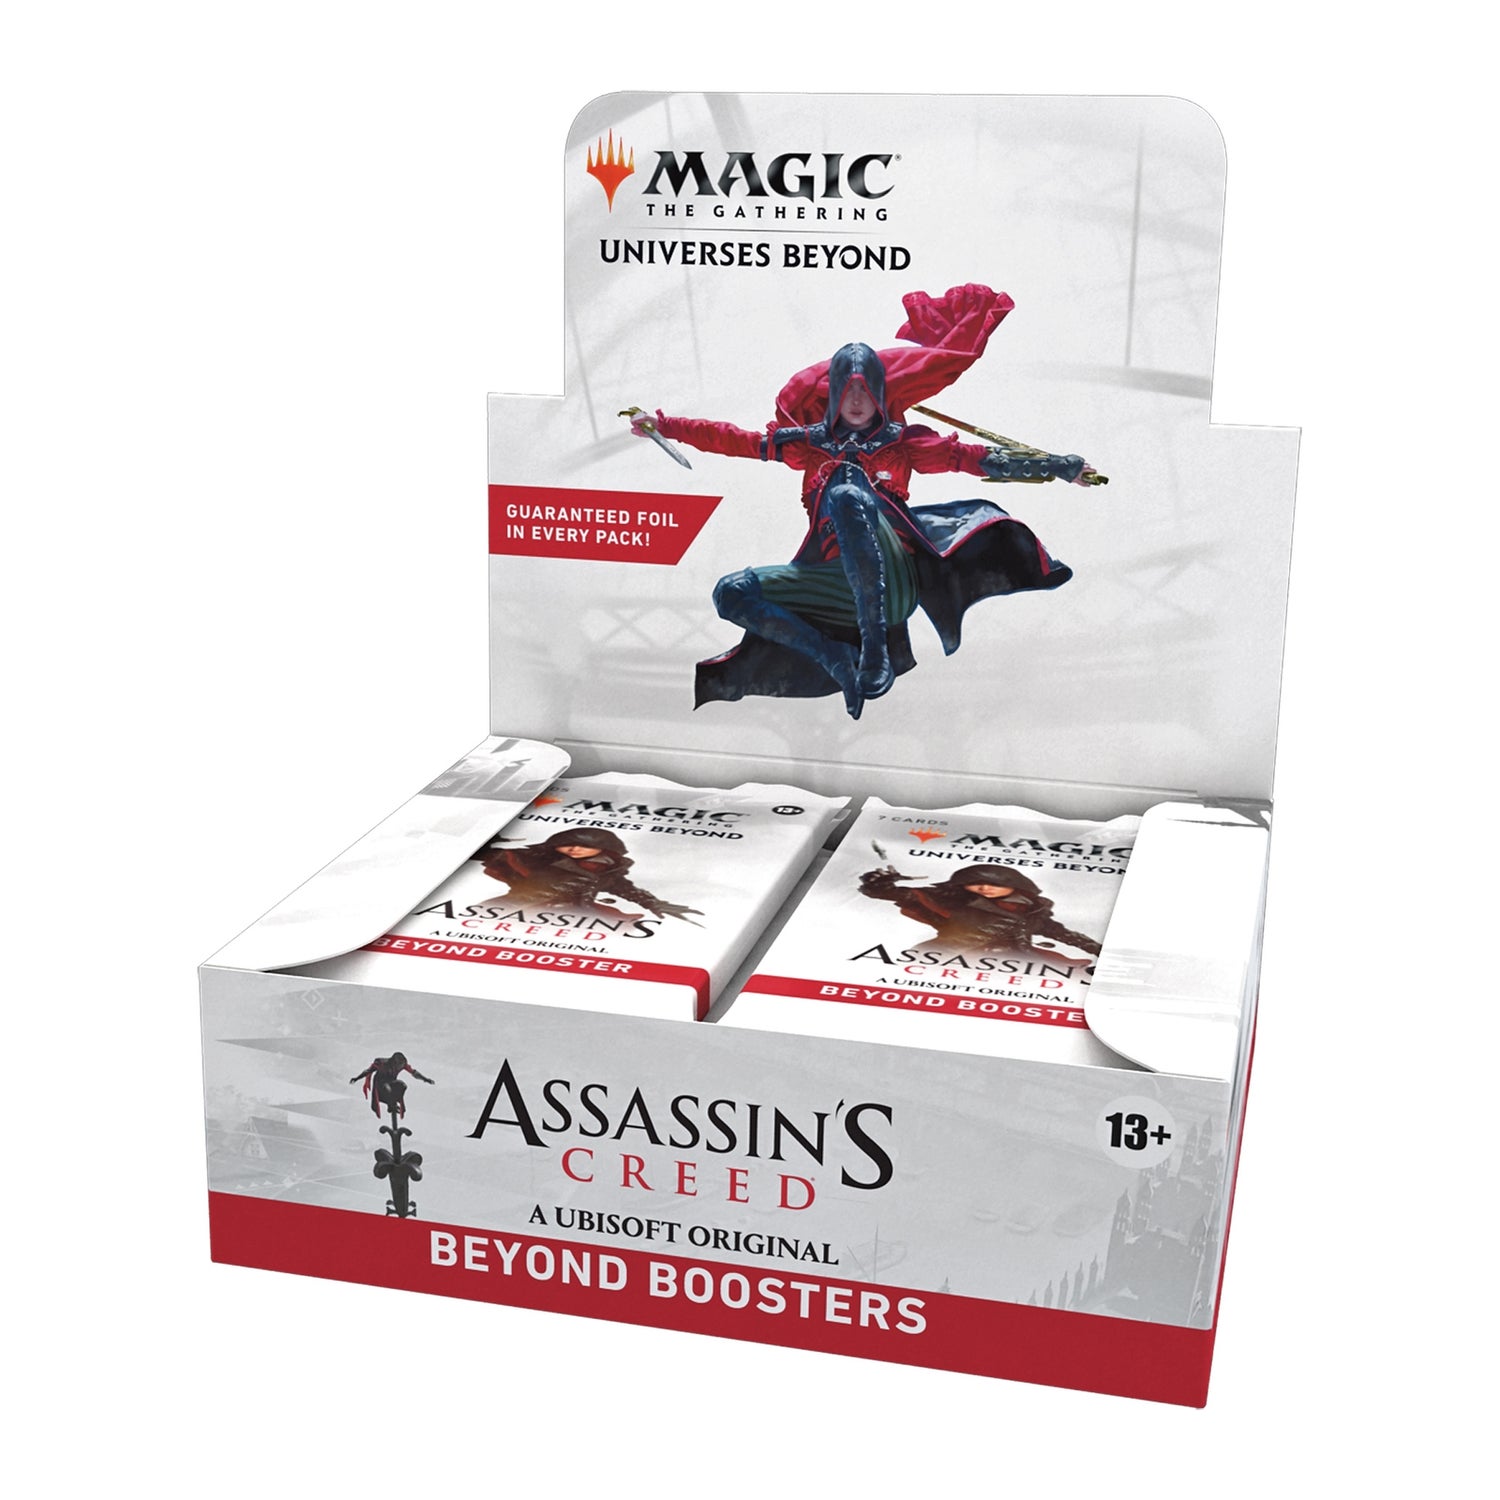 Magic: The Gathering Assassin's Creed Booster CDU (24 packs)